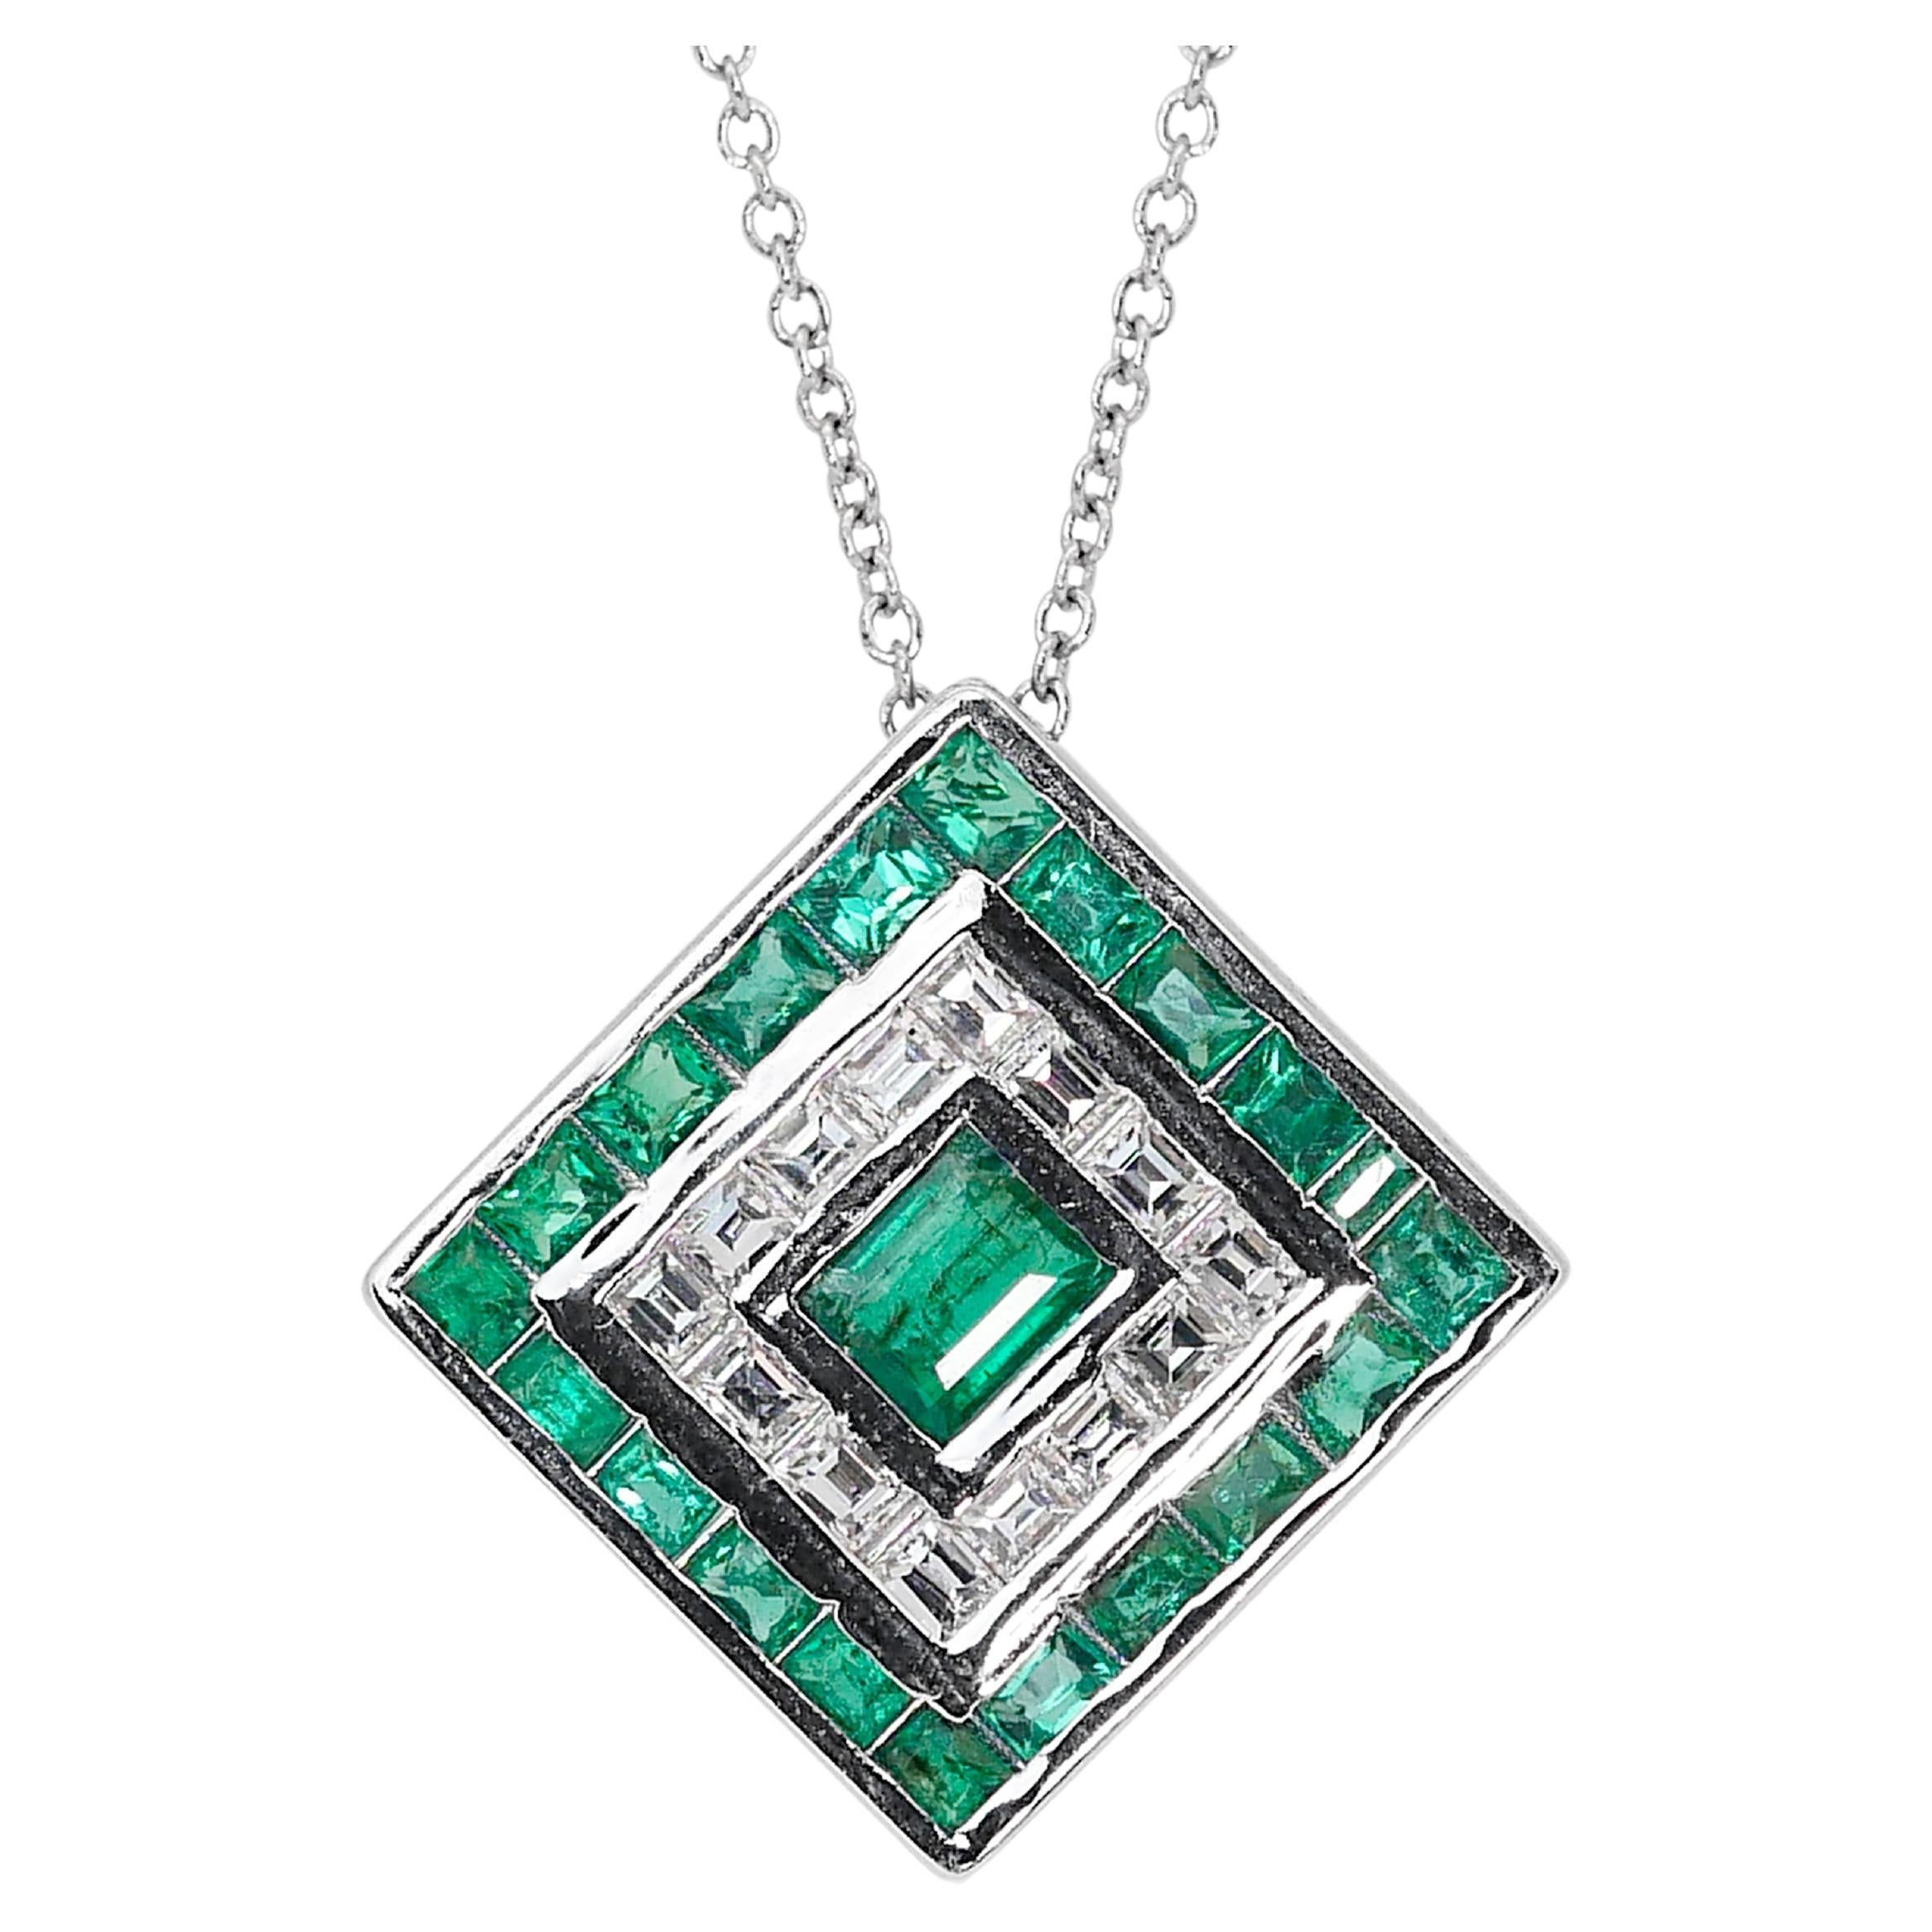 Captivating 1.45ct Emeralds and Diamonds Halo Necklace in 14k White Gold - IGI  For Sale